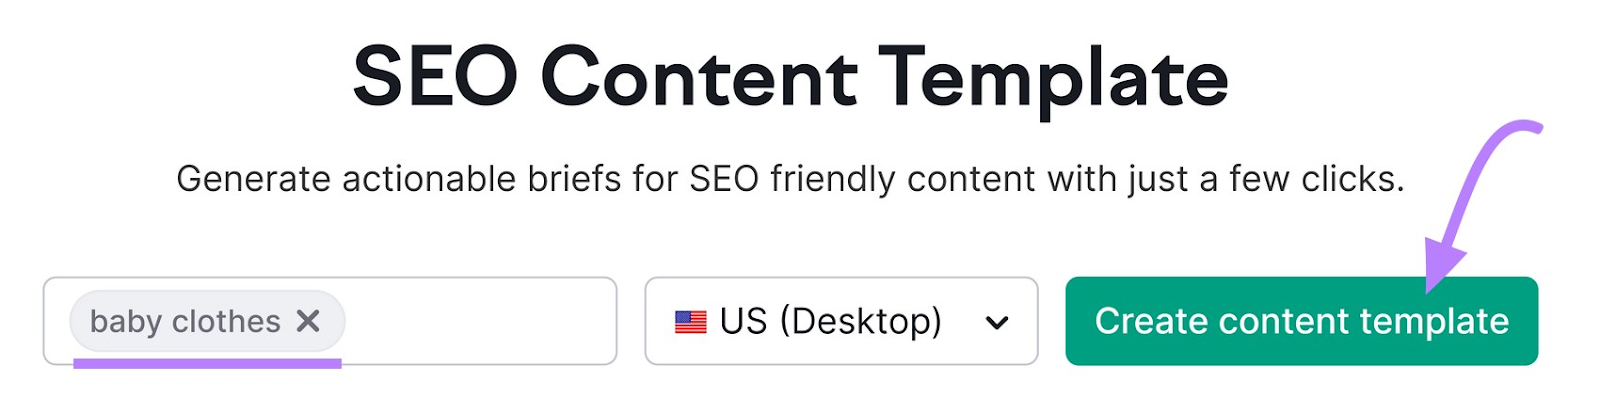 search for "baby clothes" in the US (Desktop) in SEO Content Template tool